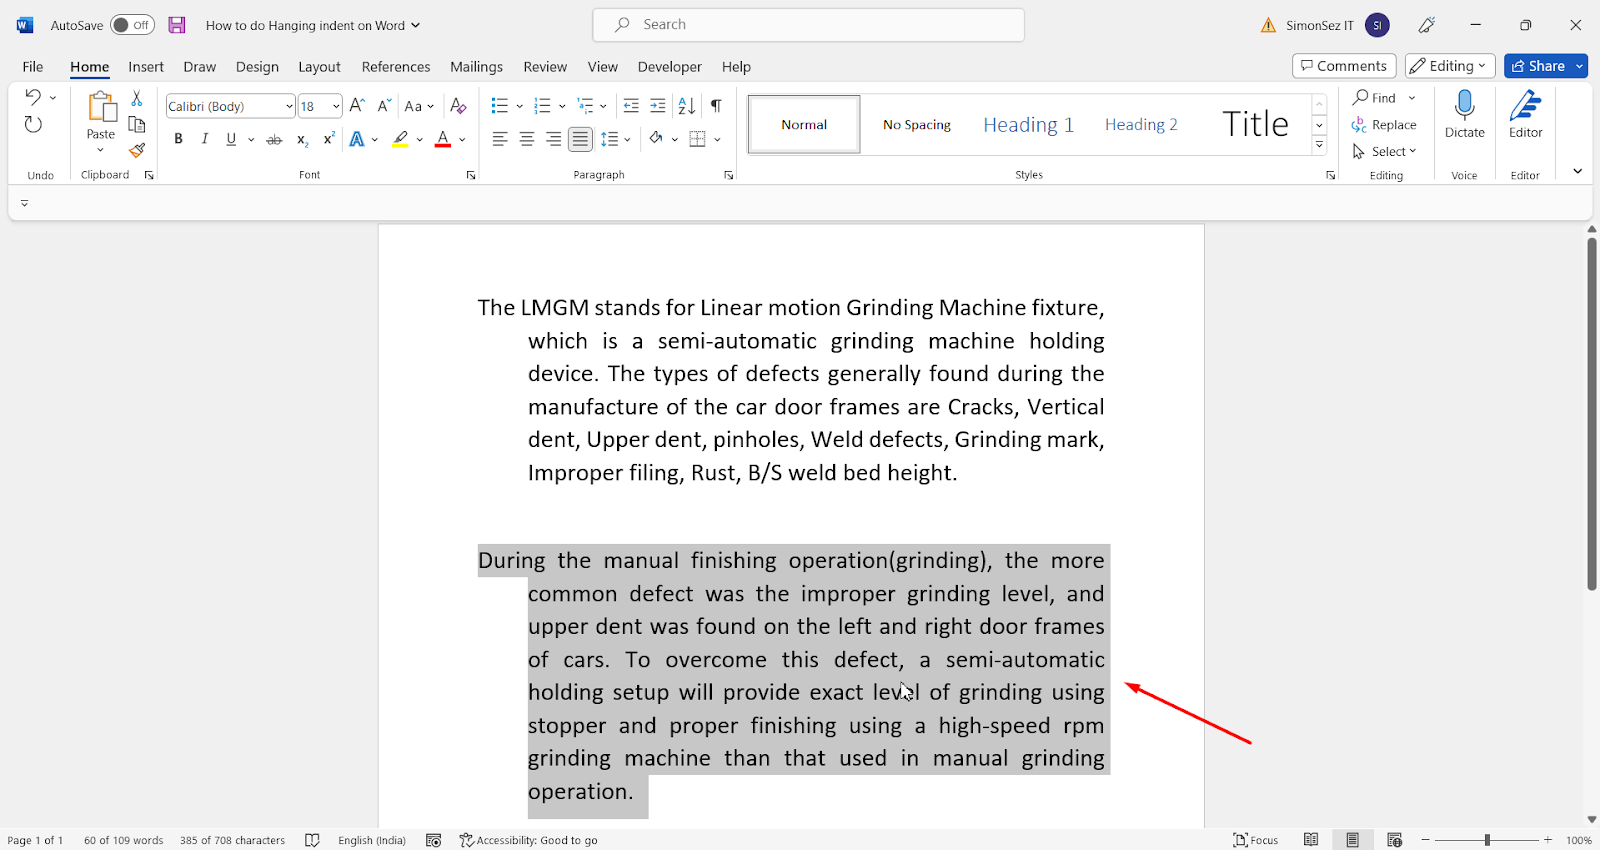 How to do hanging indent on Word- final result